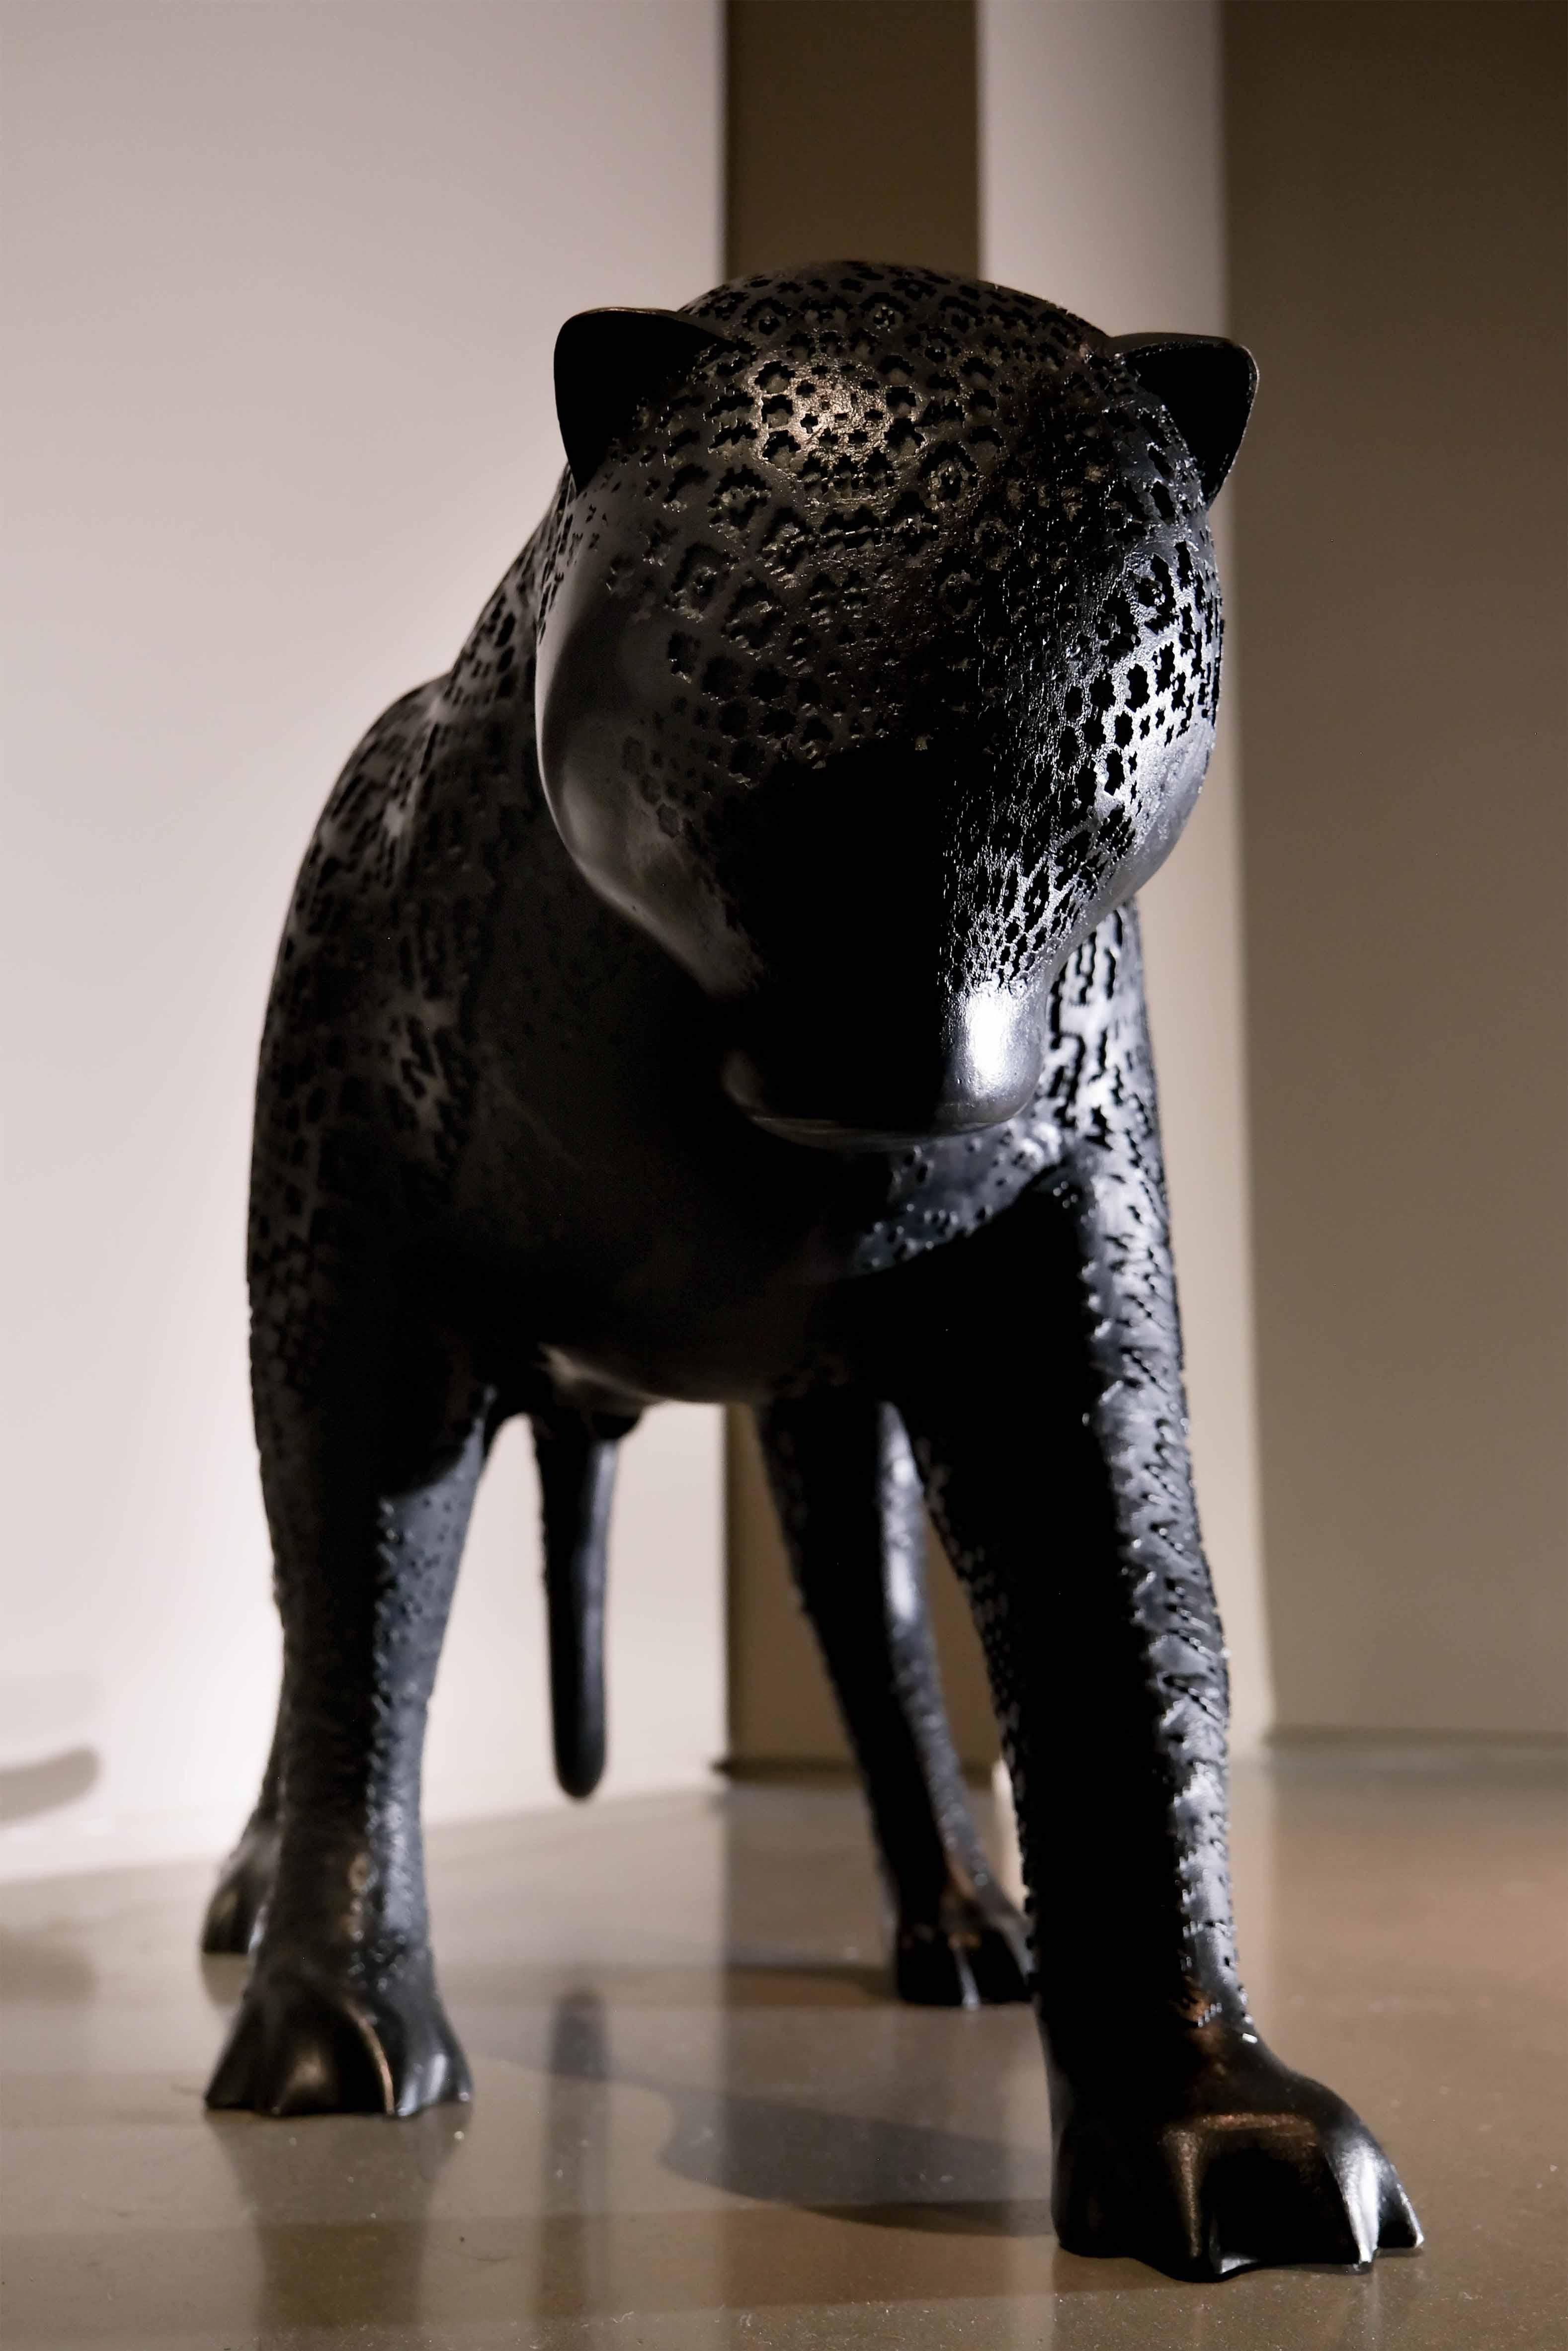 The Arabian Nights Jaguar by Hechizoo, a black cast bronze sculpture that captures the essence of power, grace, and mystique embodied by the enigmatic jaguar. This remarkable piece, cast in bronze with meticulous craftsmanship, stands as a testament